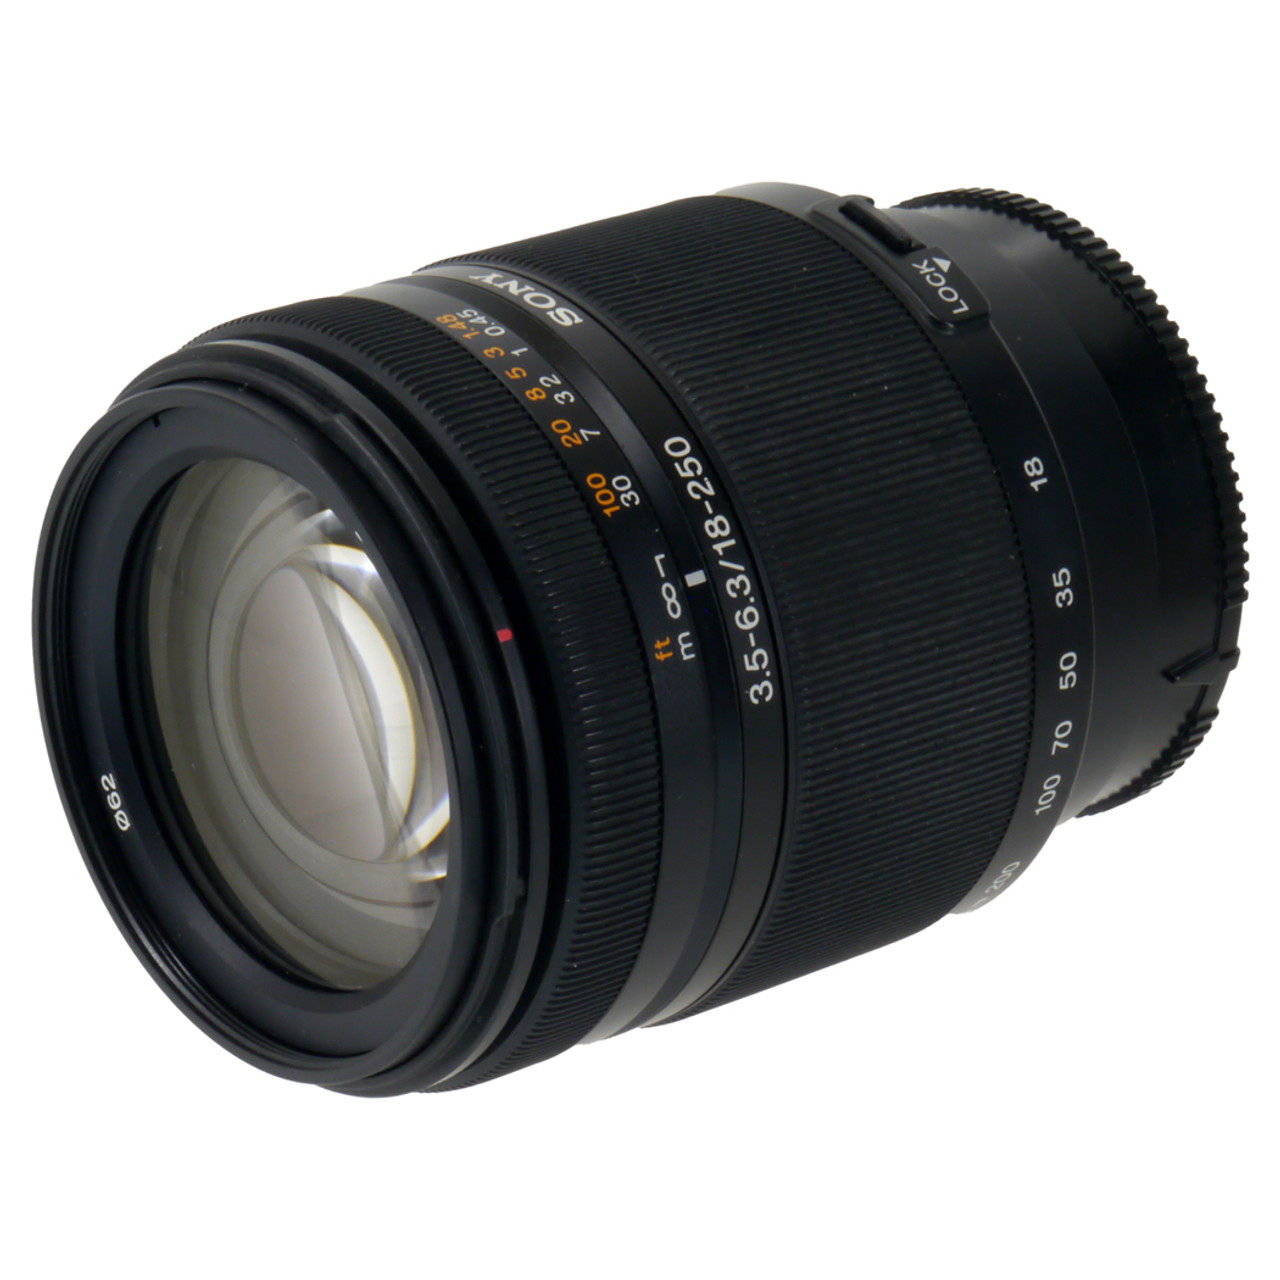 USED SONY A DT 18-250MM F3.5-6.3